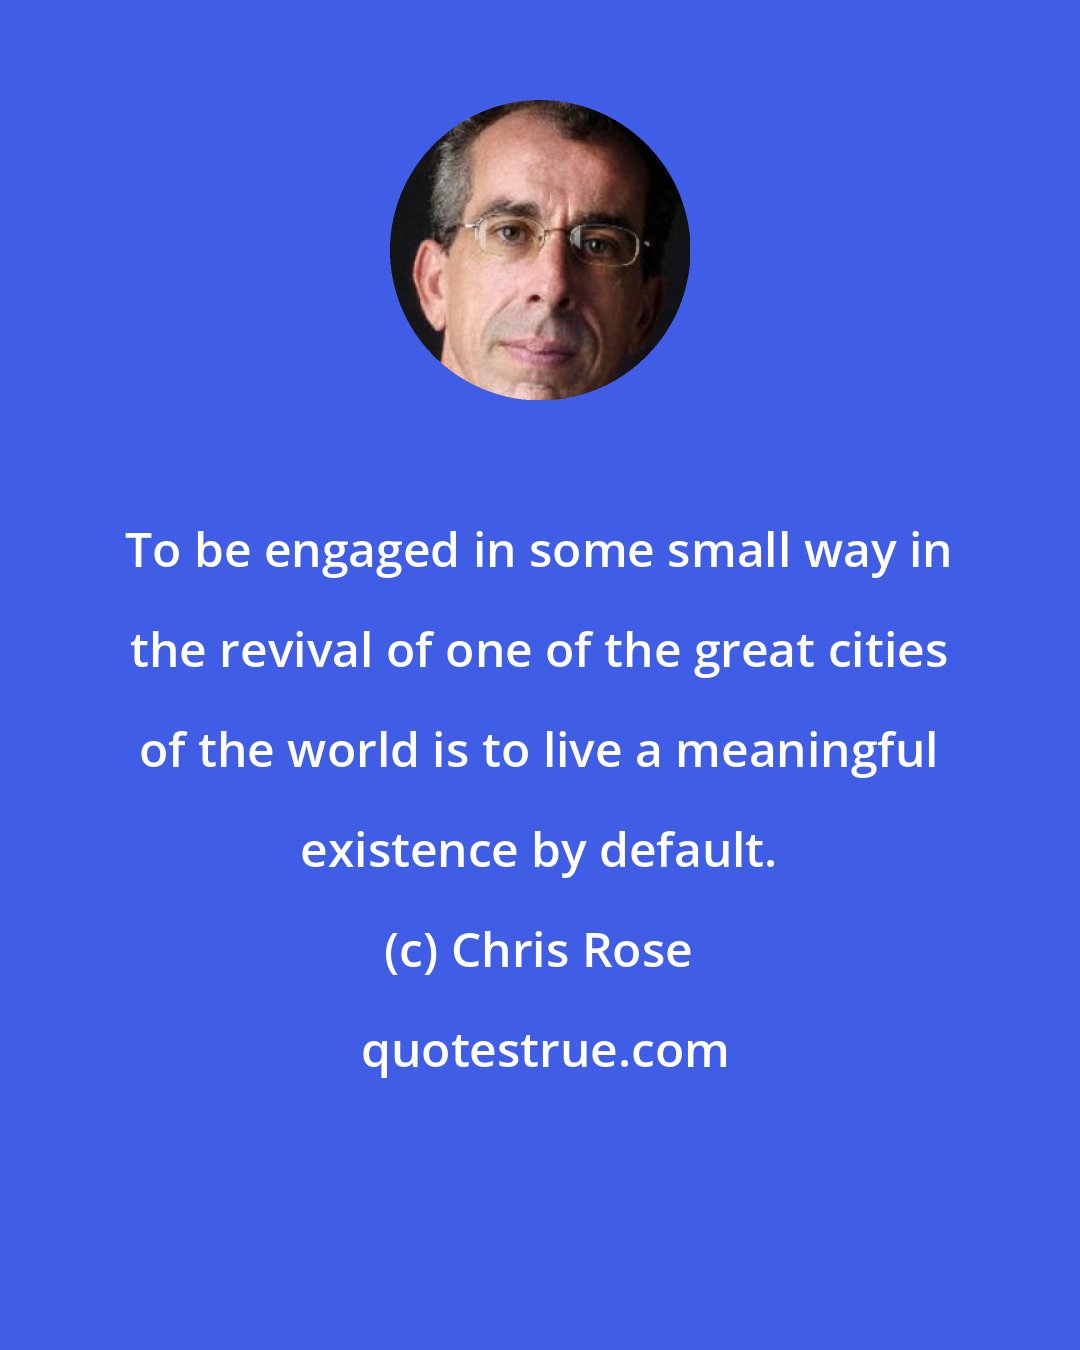 Chris Rose: To be engaged in some small way in the revival of one of the great cities of the world is to live a meaningful existence by default.